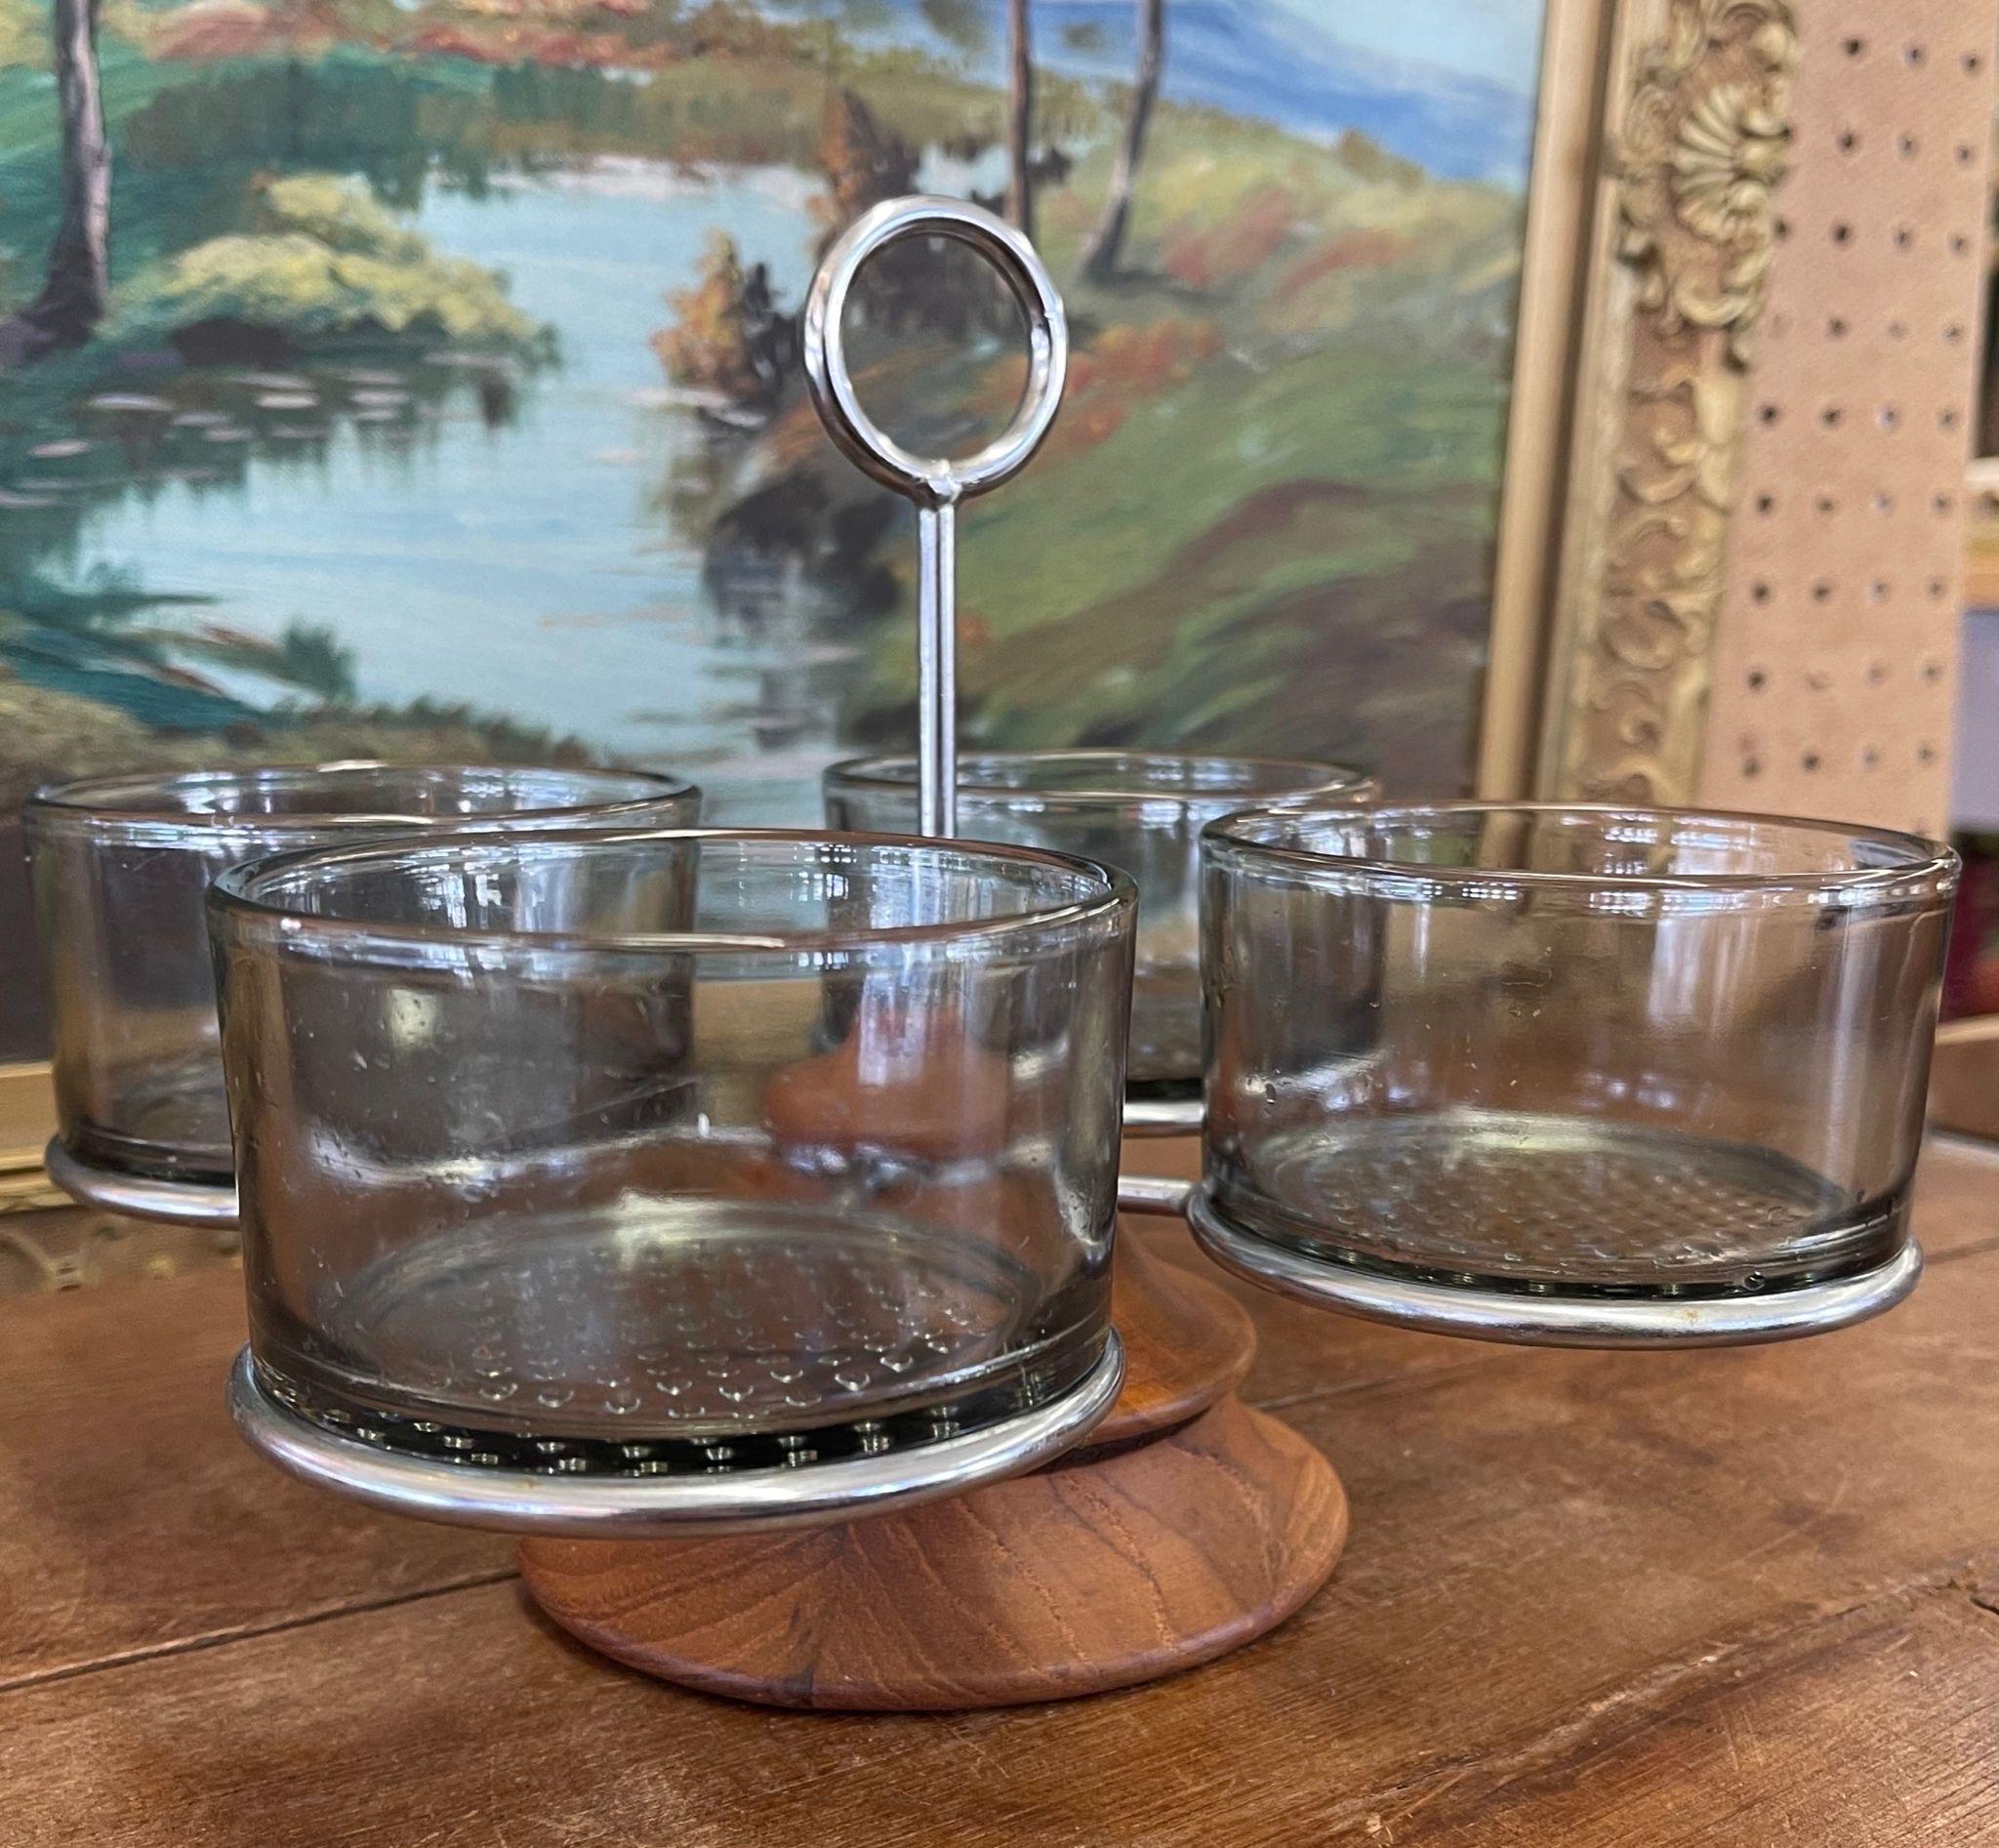 Walnut Toned Lady Susan Base. Chrome toned hardware.Made In Denmark. Mark on the bottom of the glasses. The glasses have a slight tint to them, with textured bottom.

Dimensions. 8 W ; 8 D ; 7 H